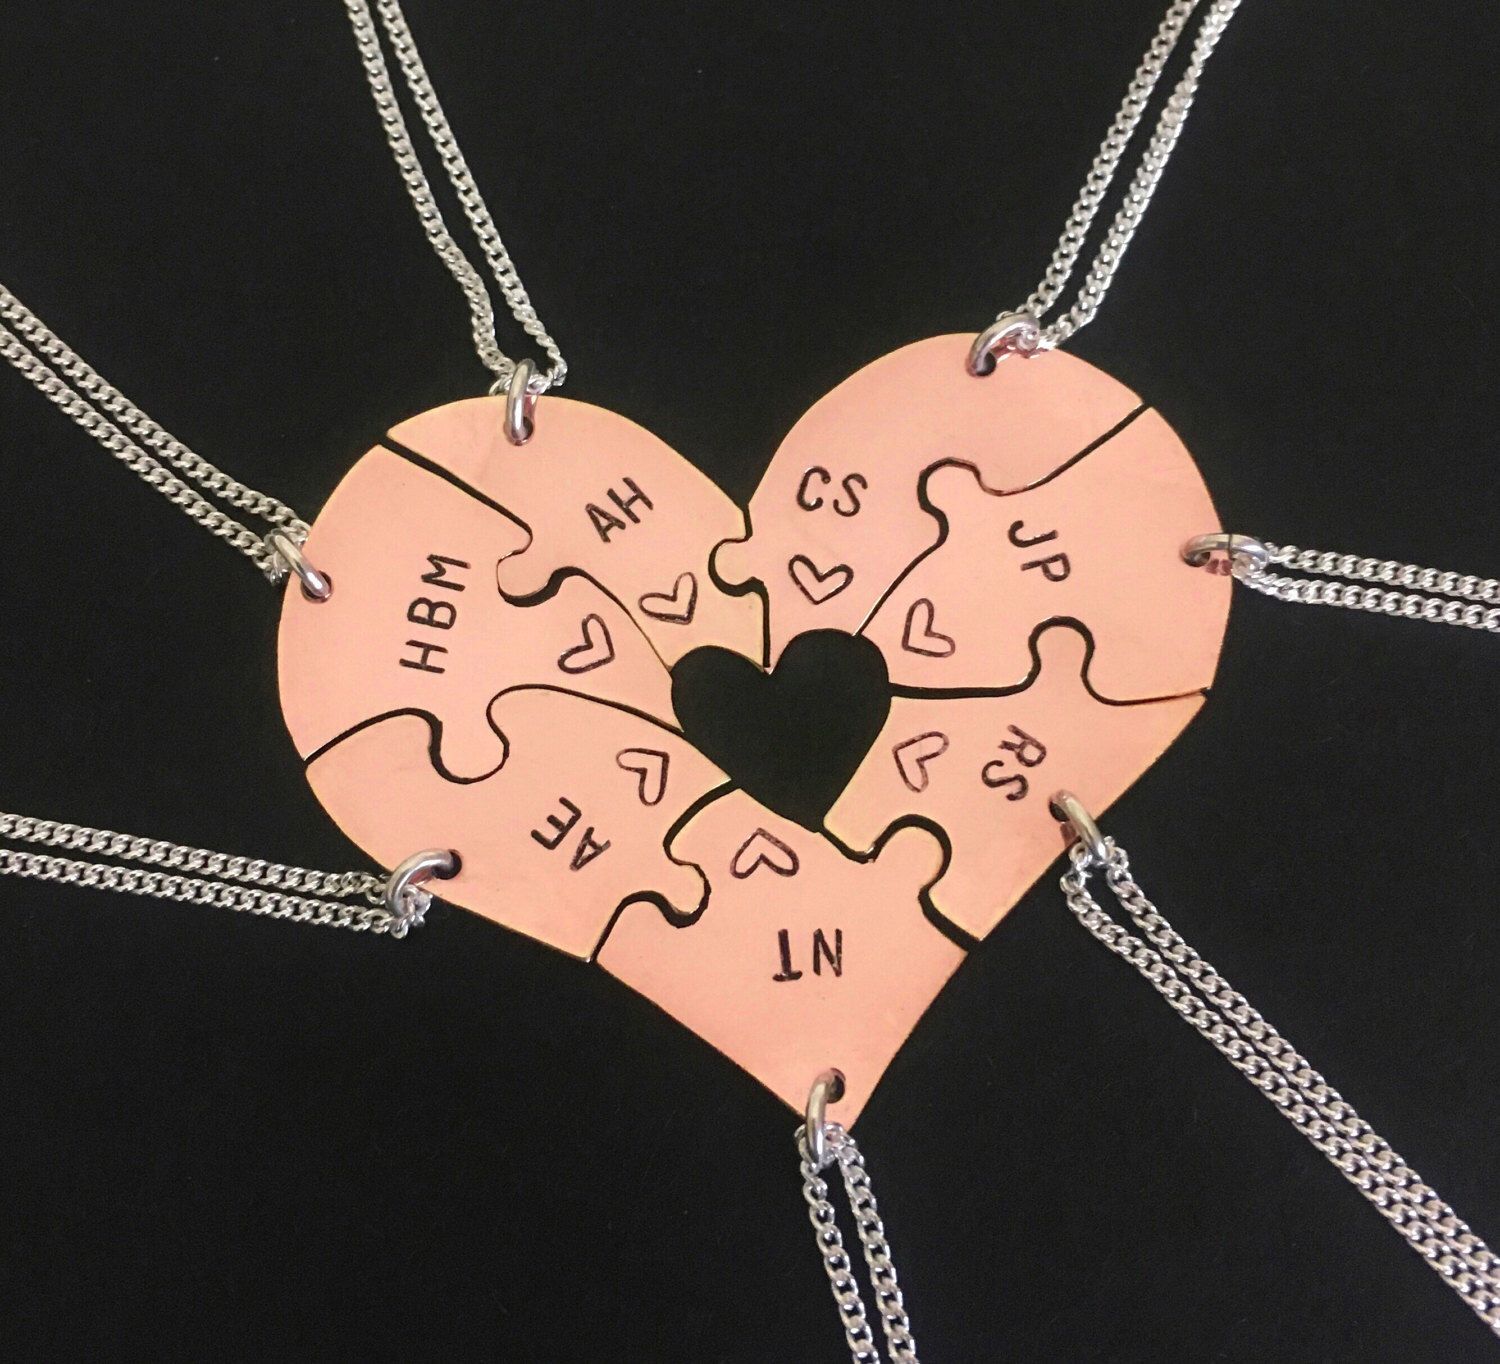 Karat Rose Gold engraved heart puzzle necklaces, shaped like a heart for friendship, family,. Friend jewelry, Best friend jewelry, Engraved hearts